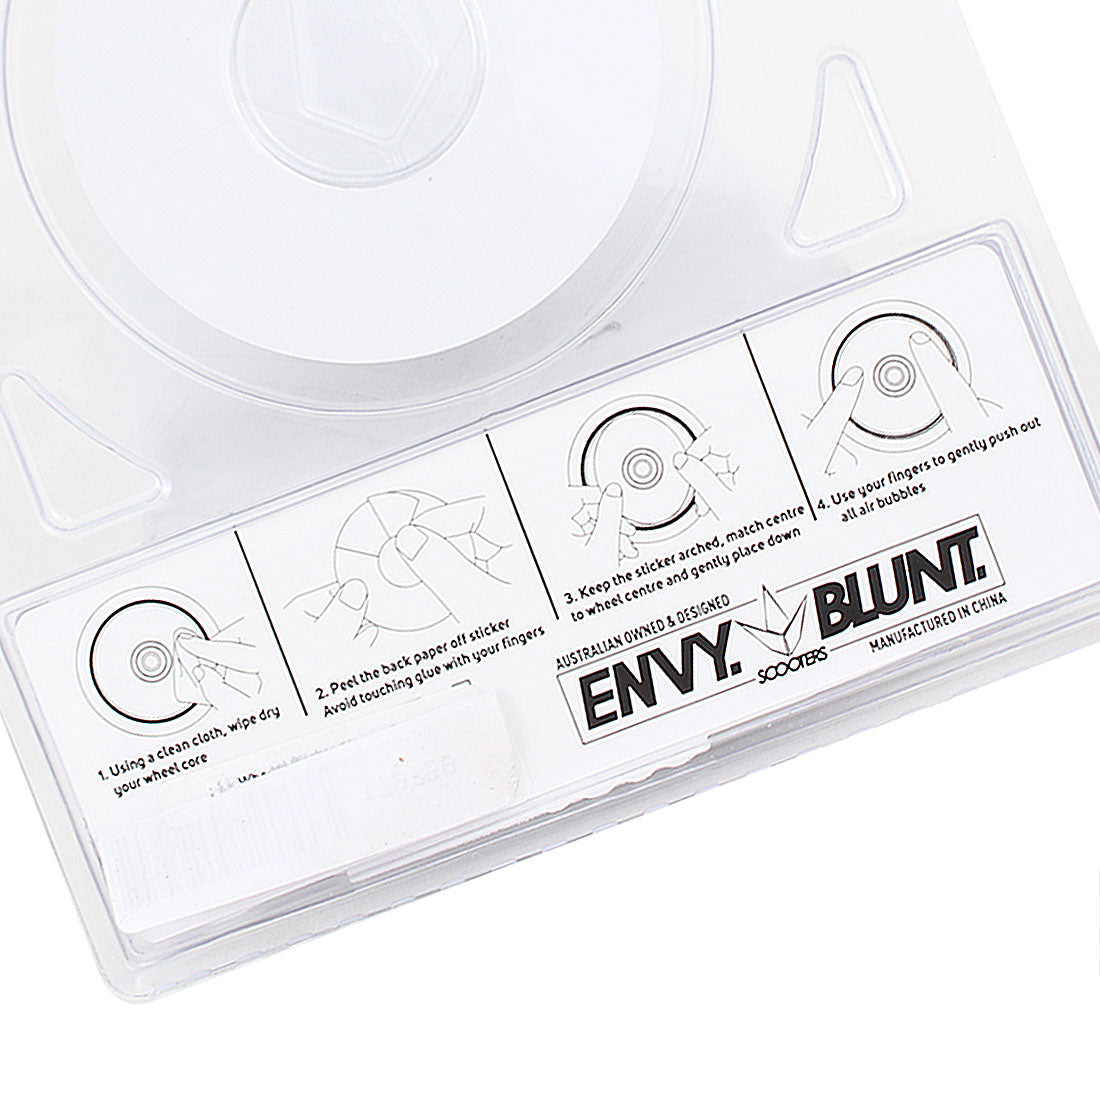 Envy Wheel Sticker Pack 110mm - Skull Scooter Accessories